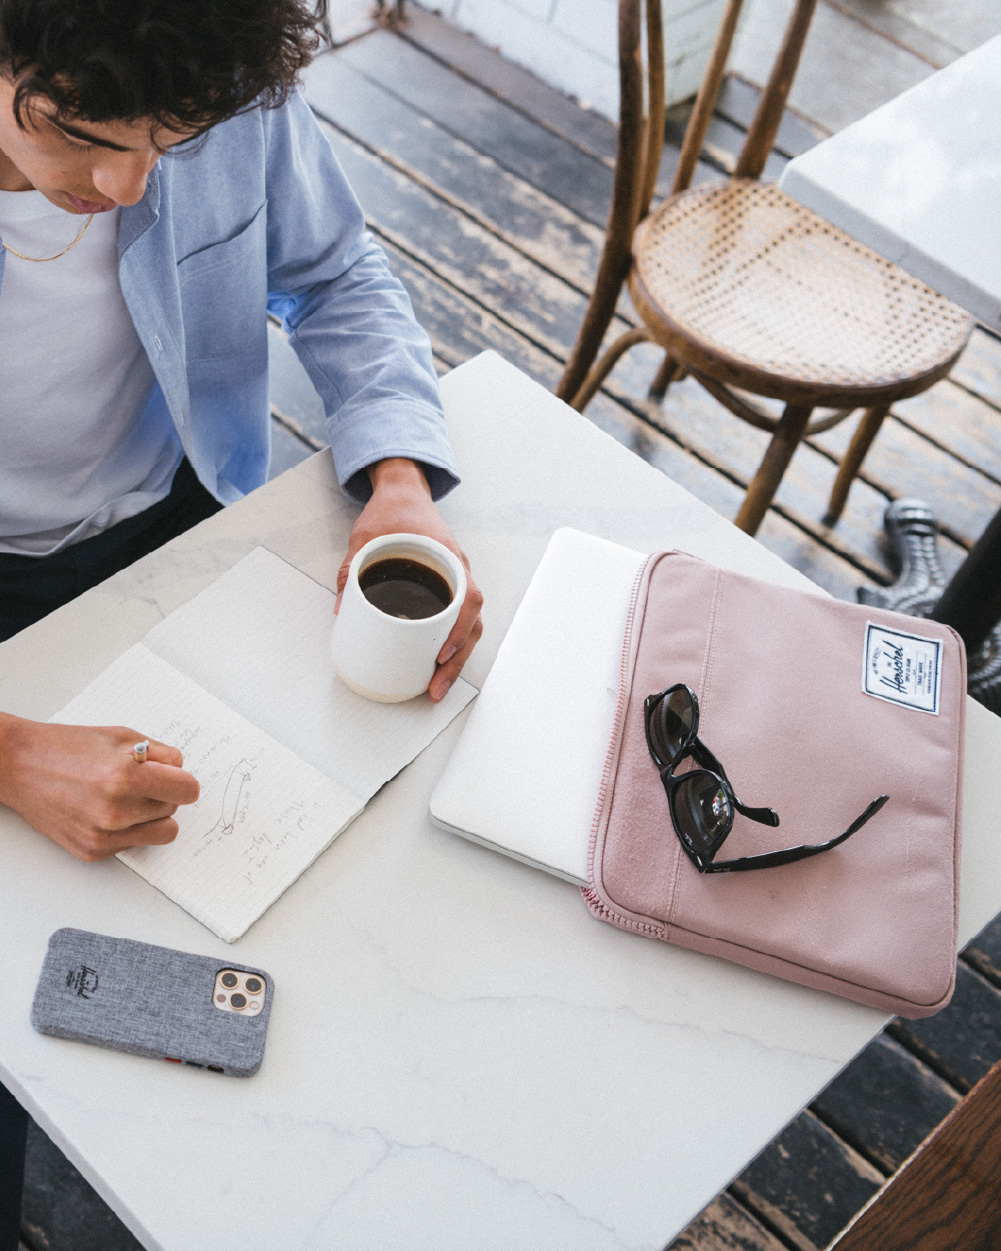 A person sitting at a cafe drinking a coffee writing in a sketchbook with their iPhone in a Herschel Classic iPhone 12 Case and a pink Anchor Laptop Sleeve on the table as well